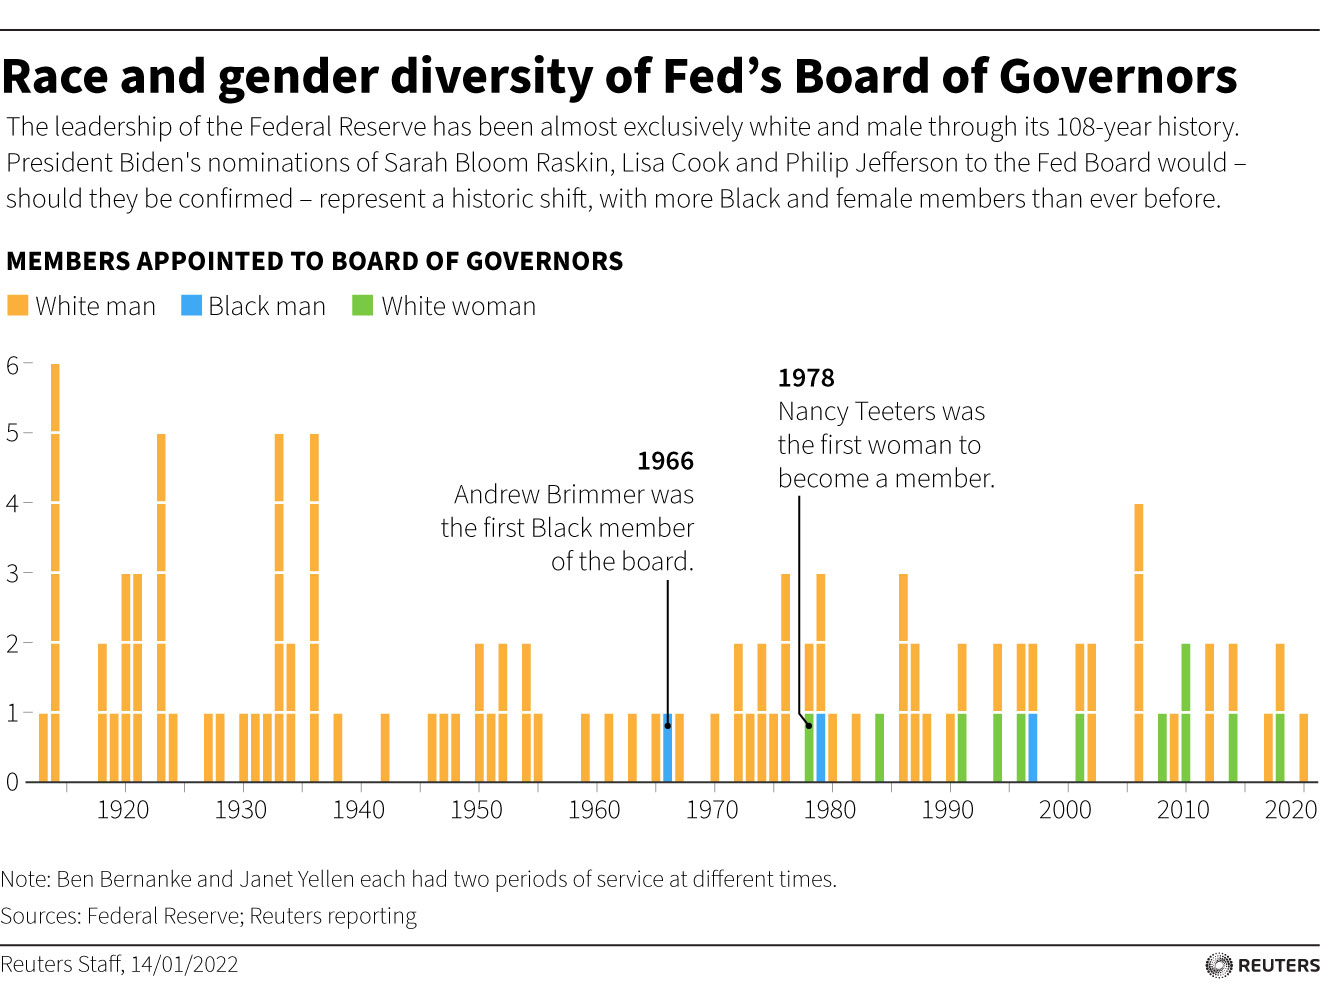 The leadership of the Federal Reserve has been almost exclusively white and male through its 108-year history.